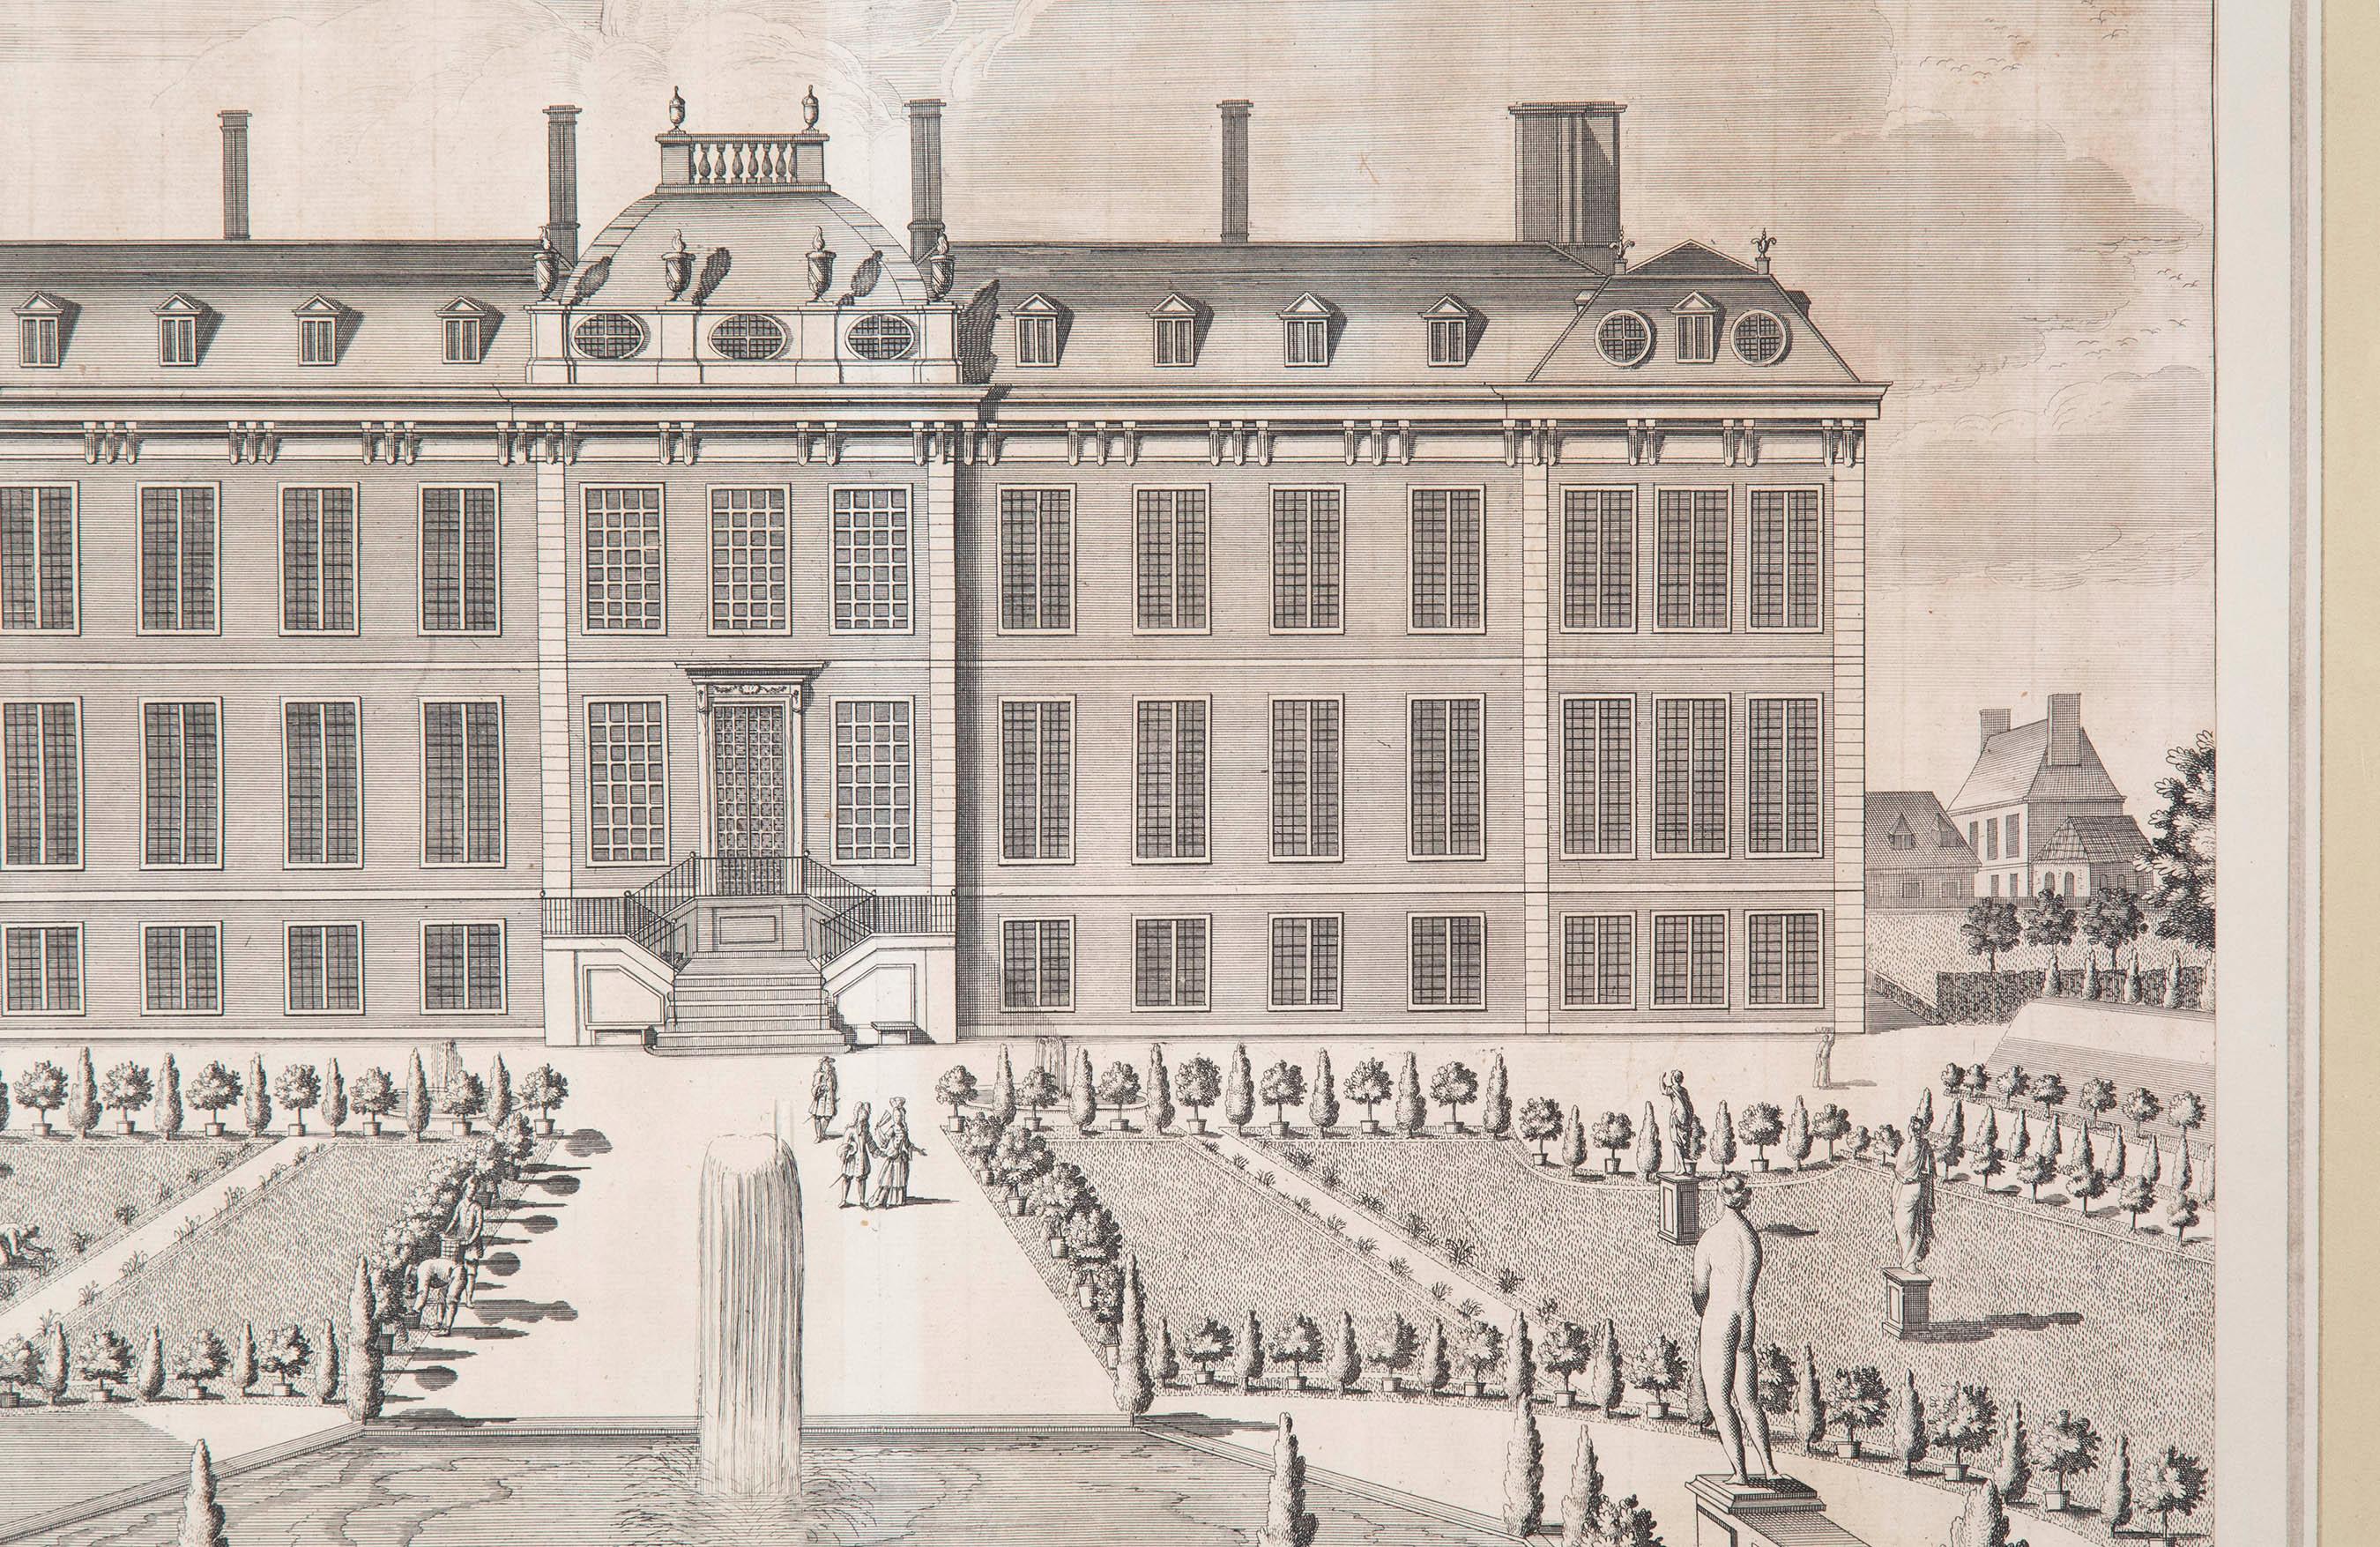 Engraved Large Antique Architectural Prints or Engraving of Montagu House, circa 1715